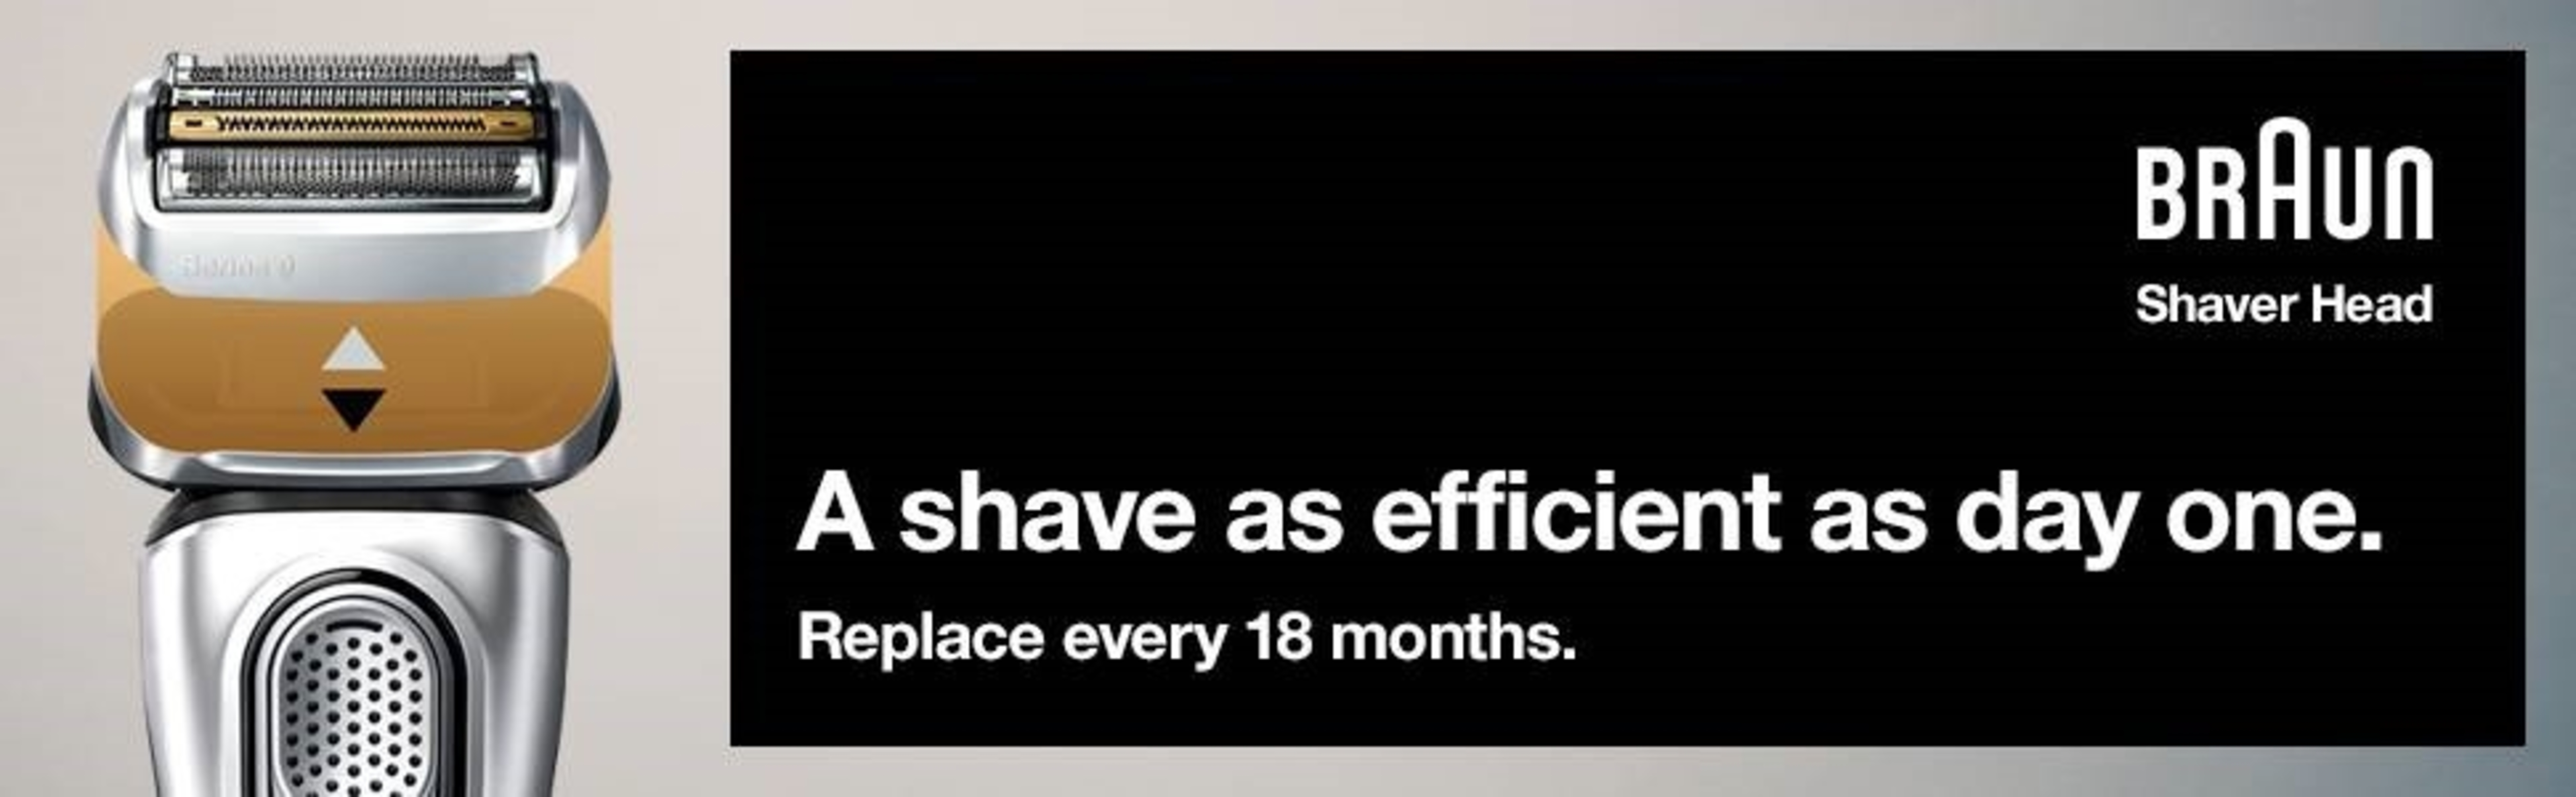 A shave efficient as day one